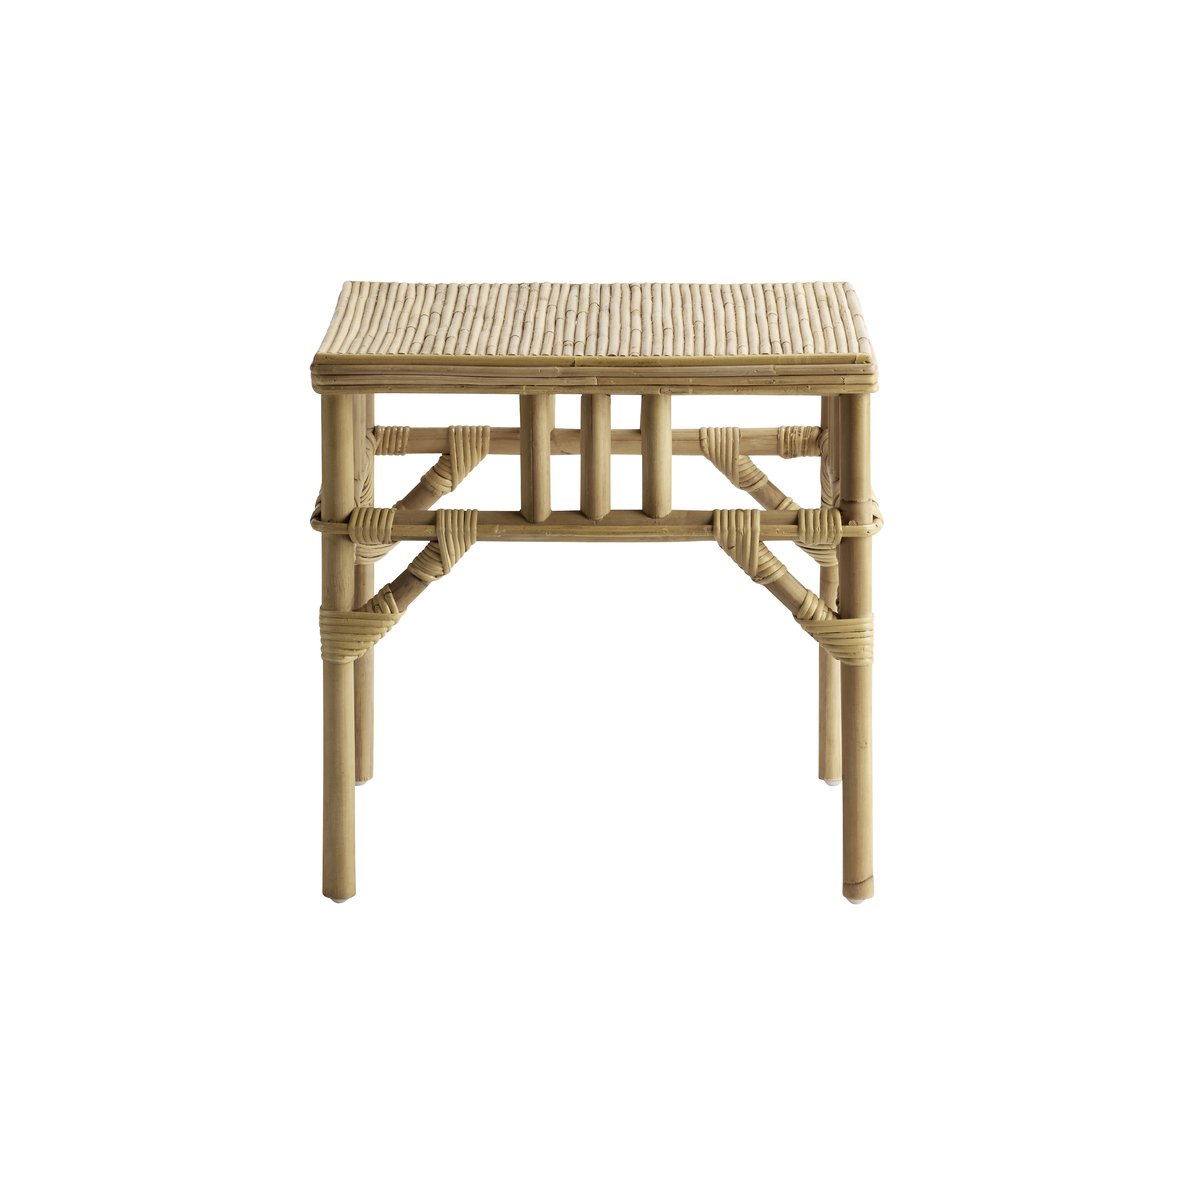 Small rattan table from the new rattan collection by tinekhome